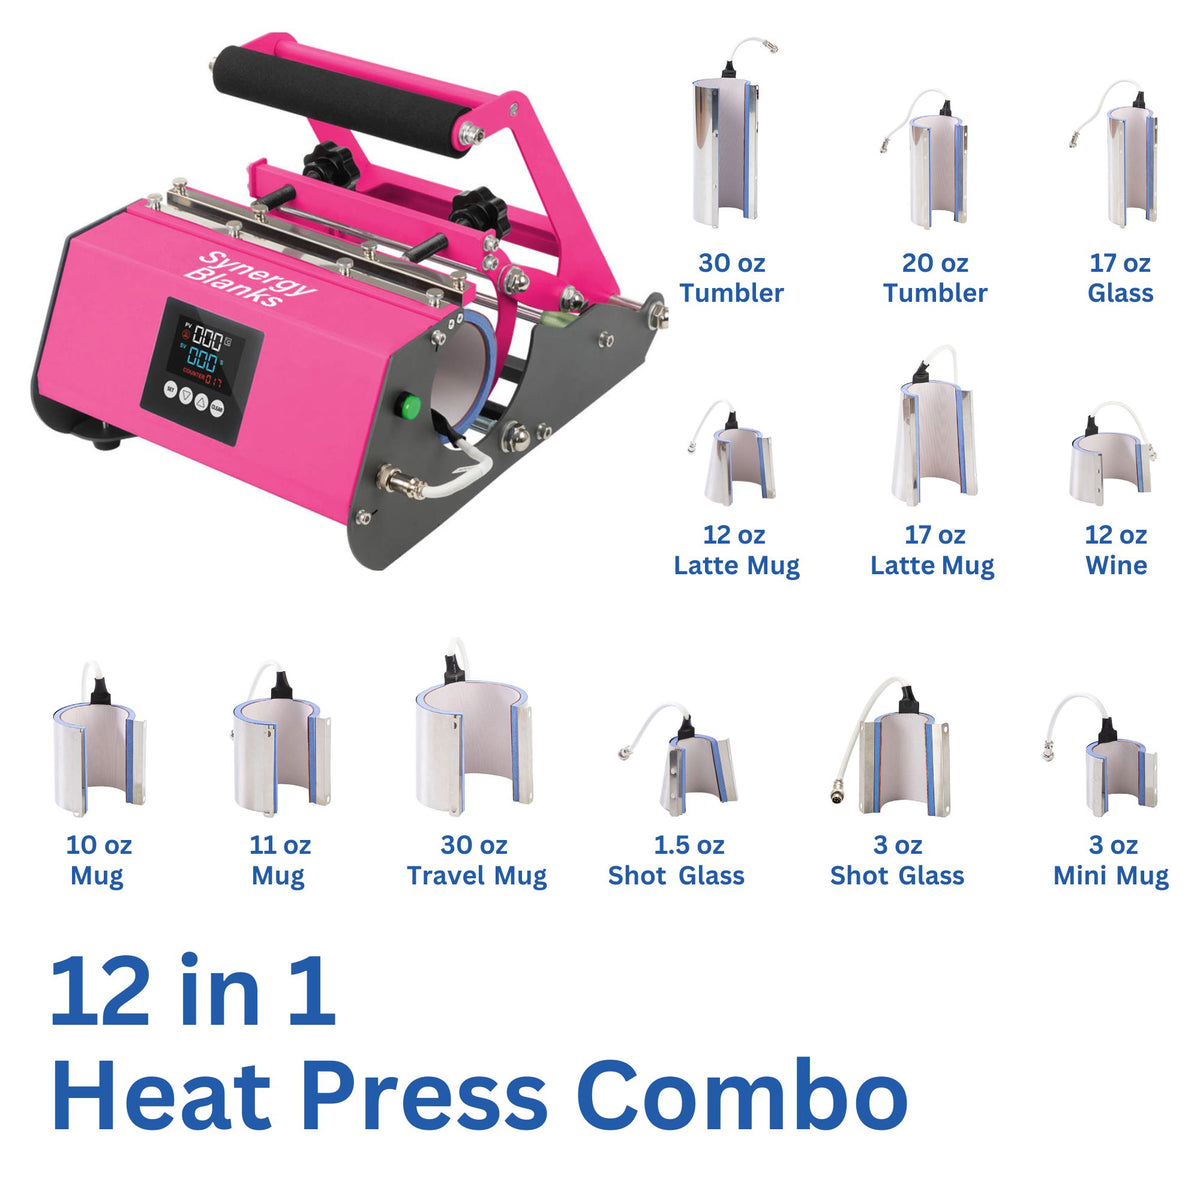 Synergy Blanks Elite Pro 12 in 1 Tumbler Heat Press - Bright Pink